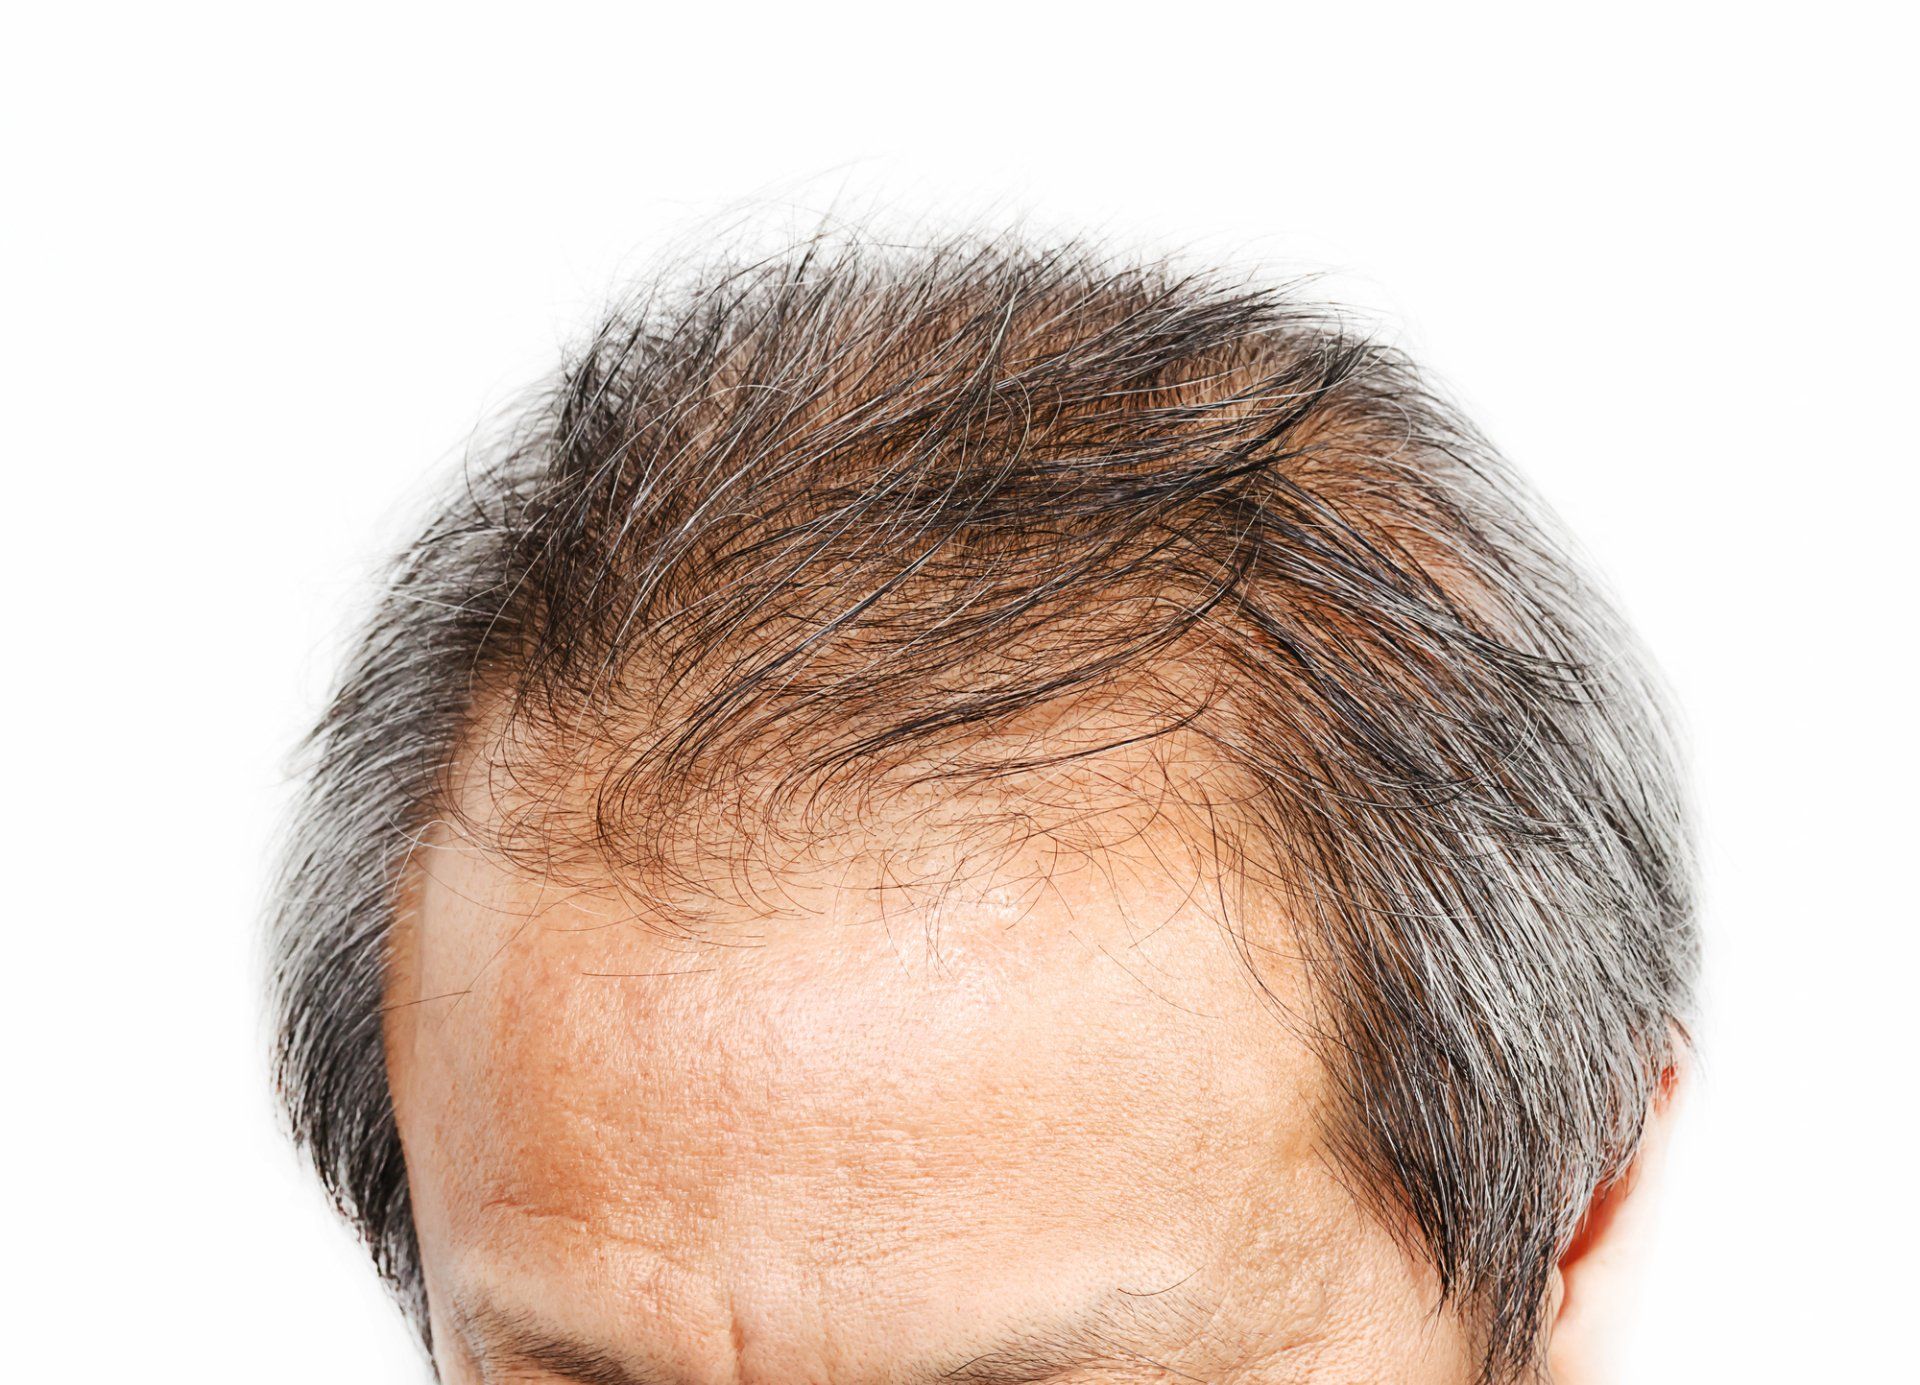 What You Need to Know About Losartan and Hair Loss